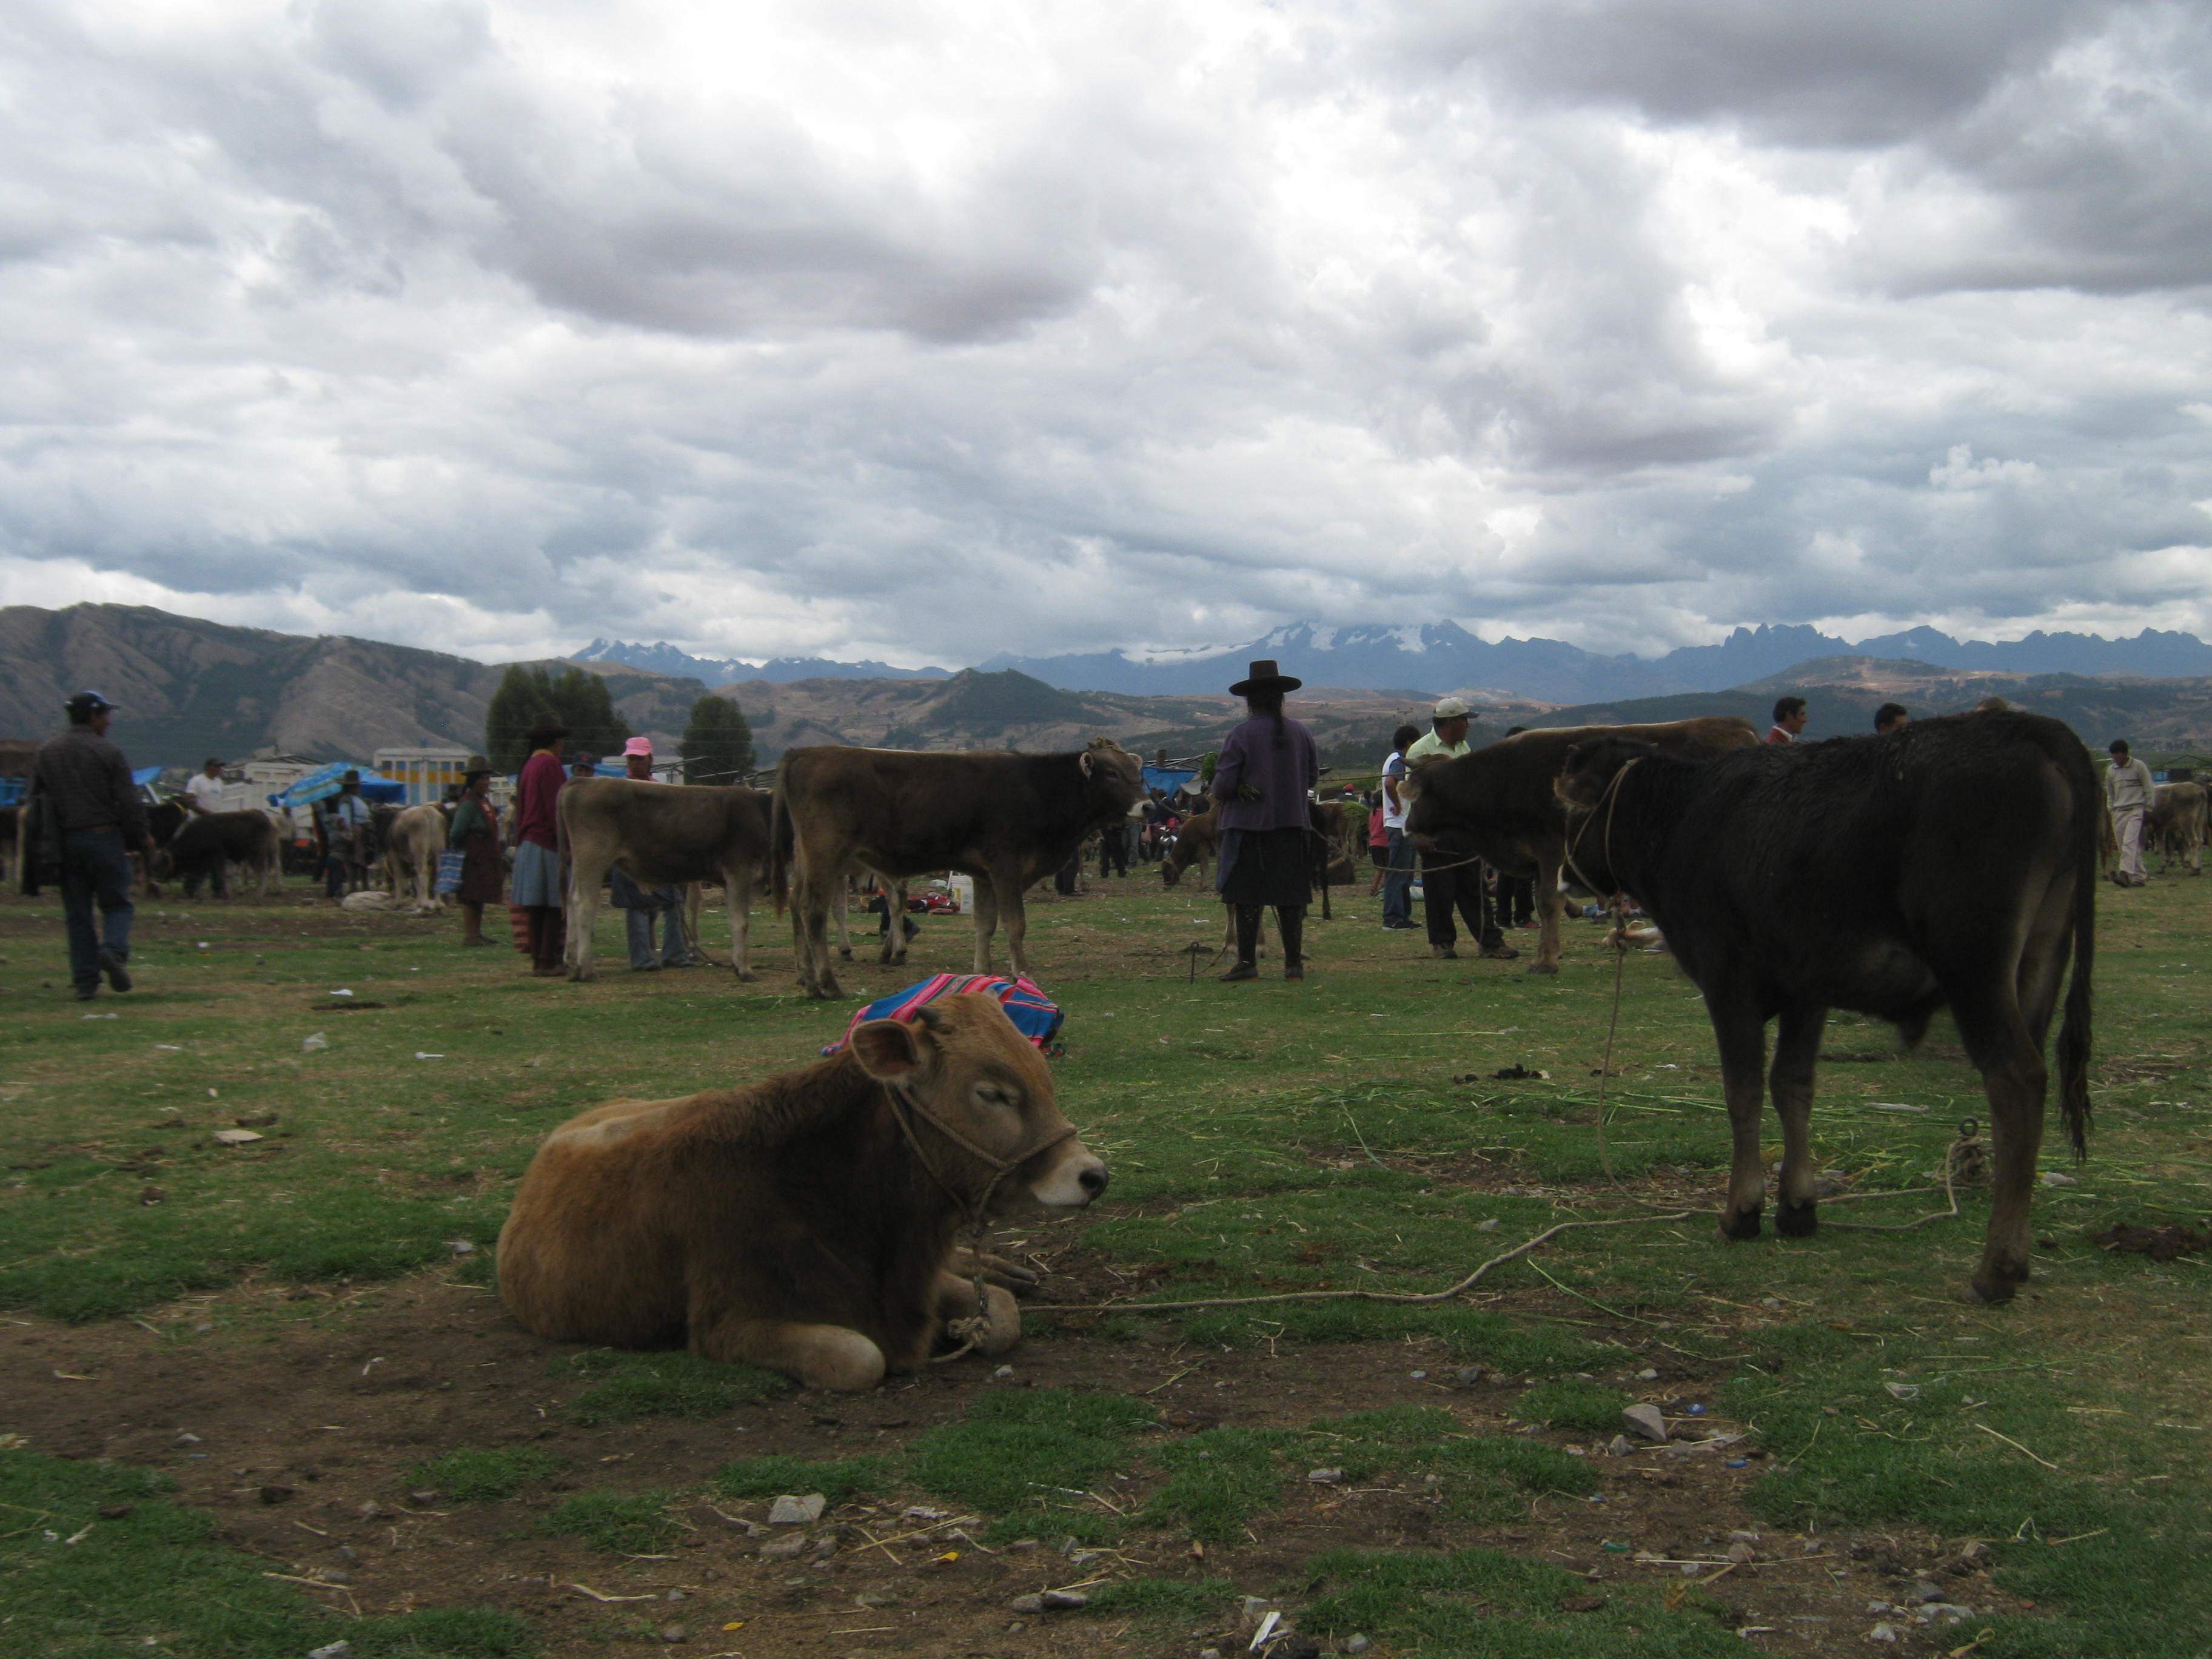 Rural development banks need other rules than multinational investment banks: farmers’ market in Peru’s Andes.